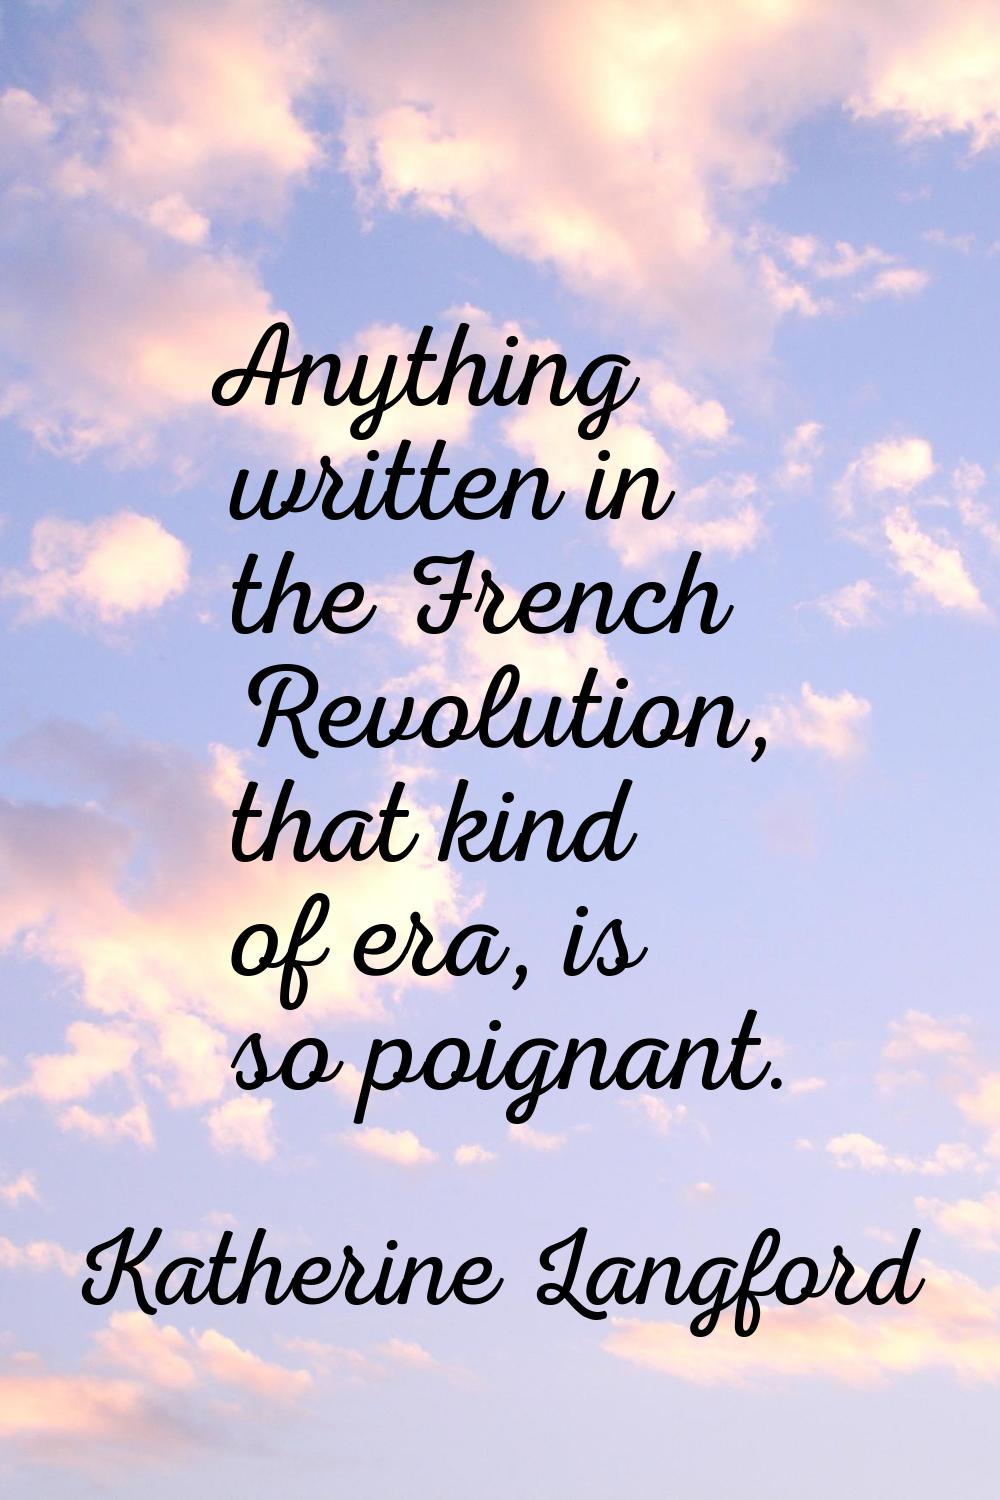 Anything written in the French Revolution, that kind of era, is so poignant.